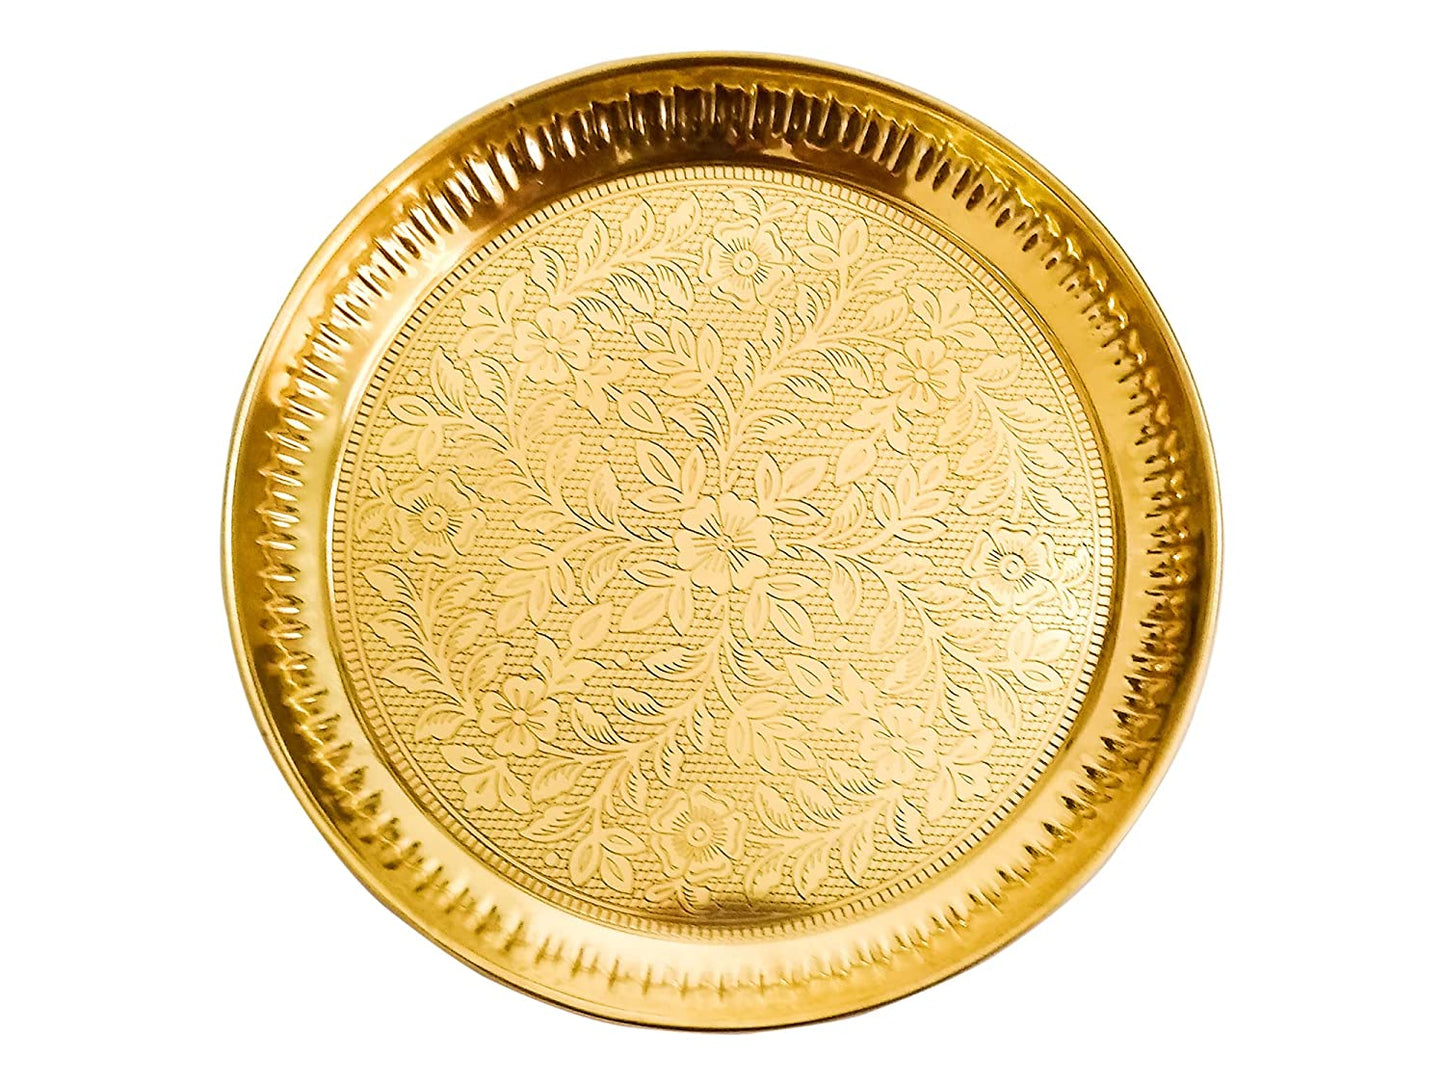 Aarti Pooja Plate Brass 8 inches